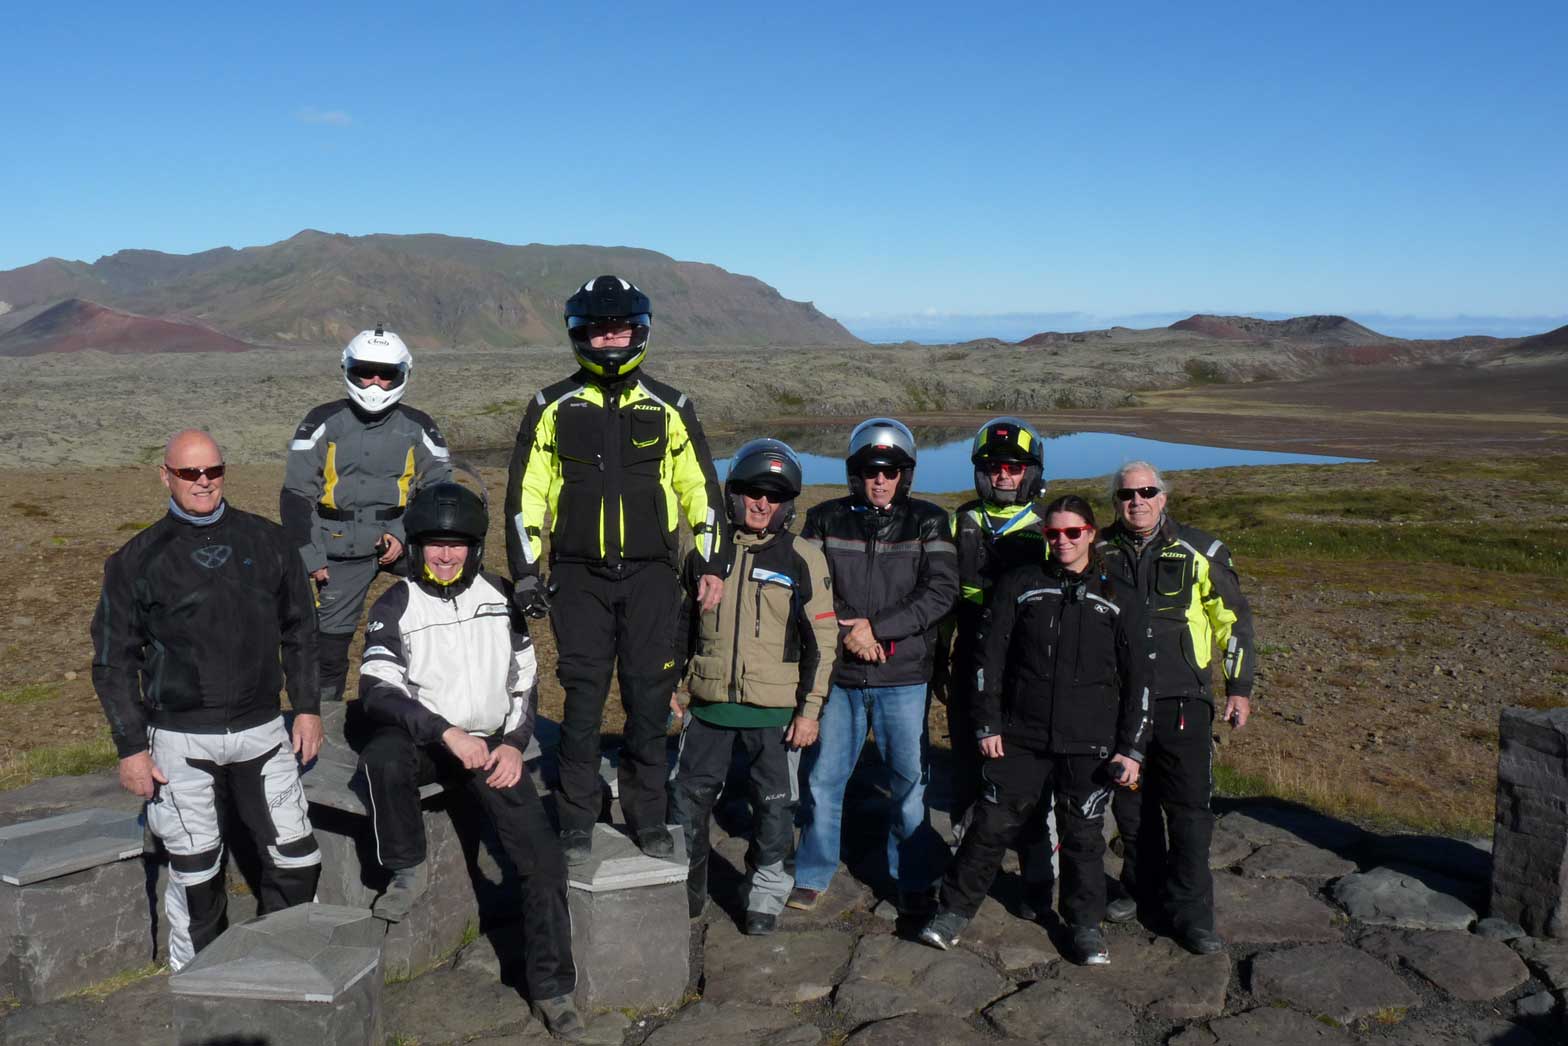 Iceland Adventure - Motorcycle Tour by Ayres Adventures